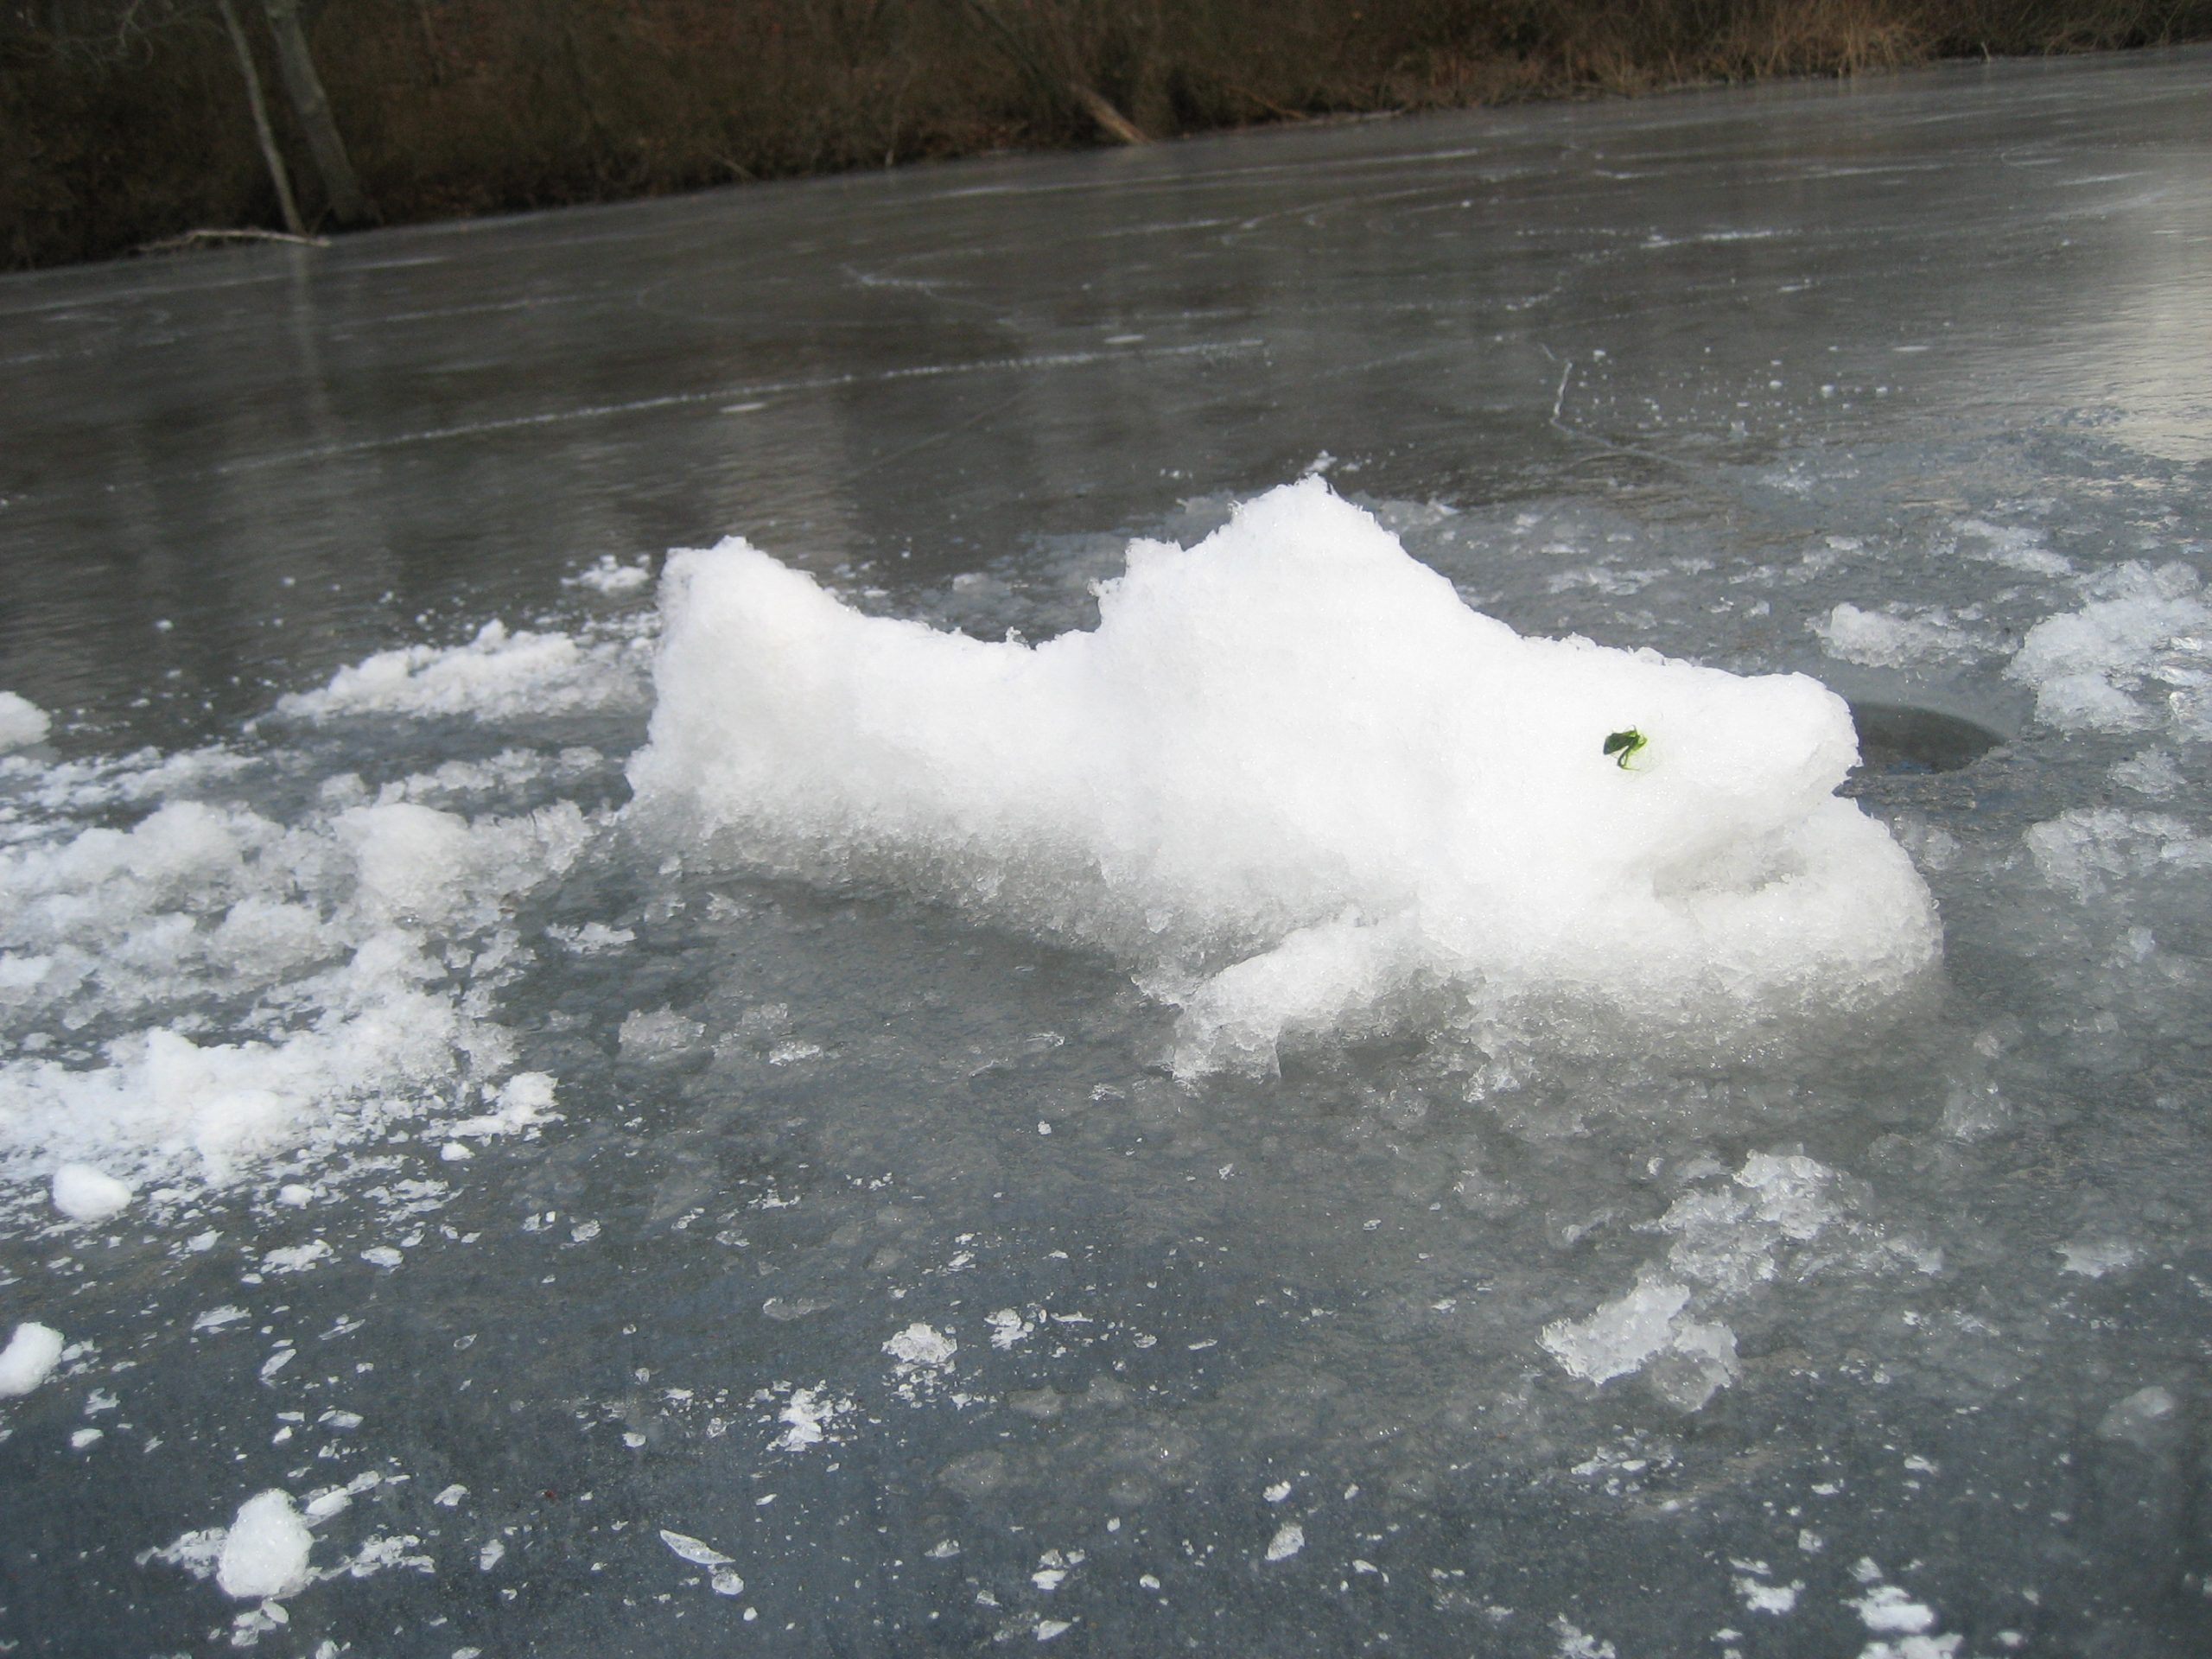 Ice Fish on Mechanics Pond (user submitted)